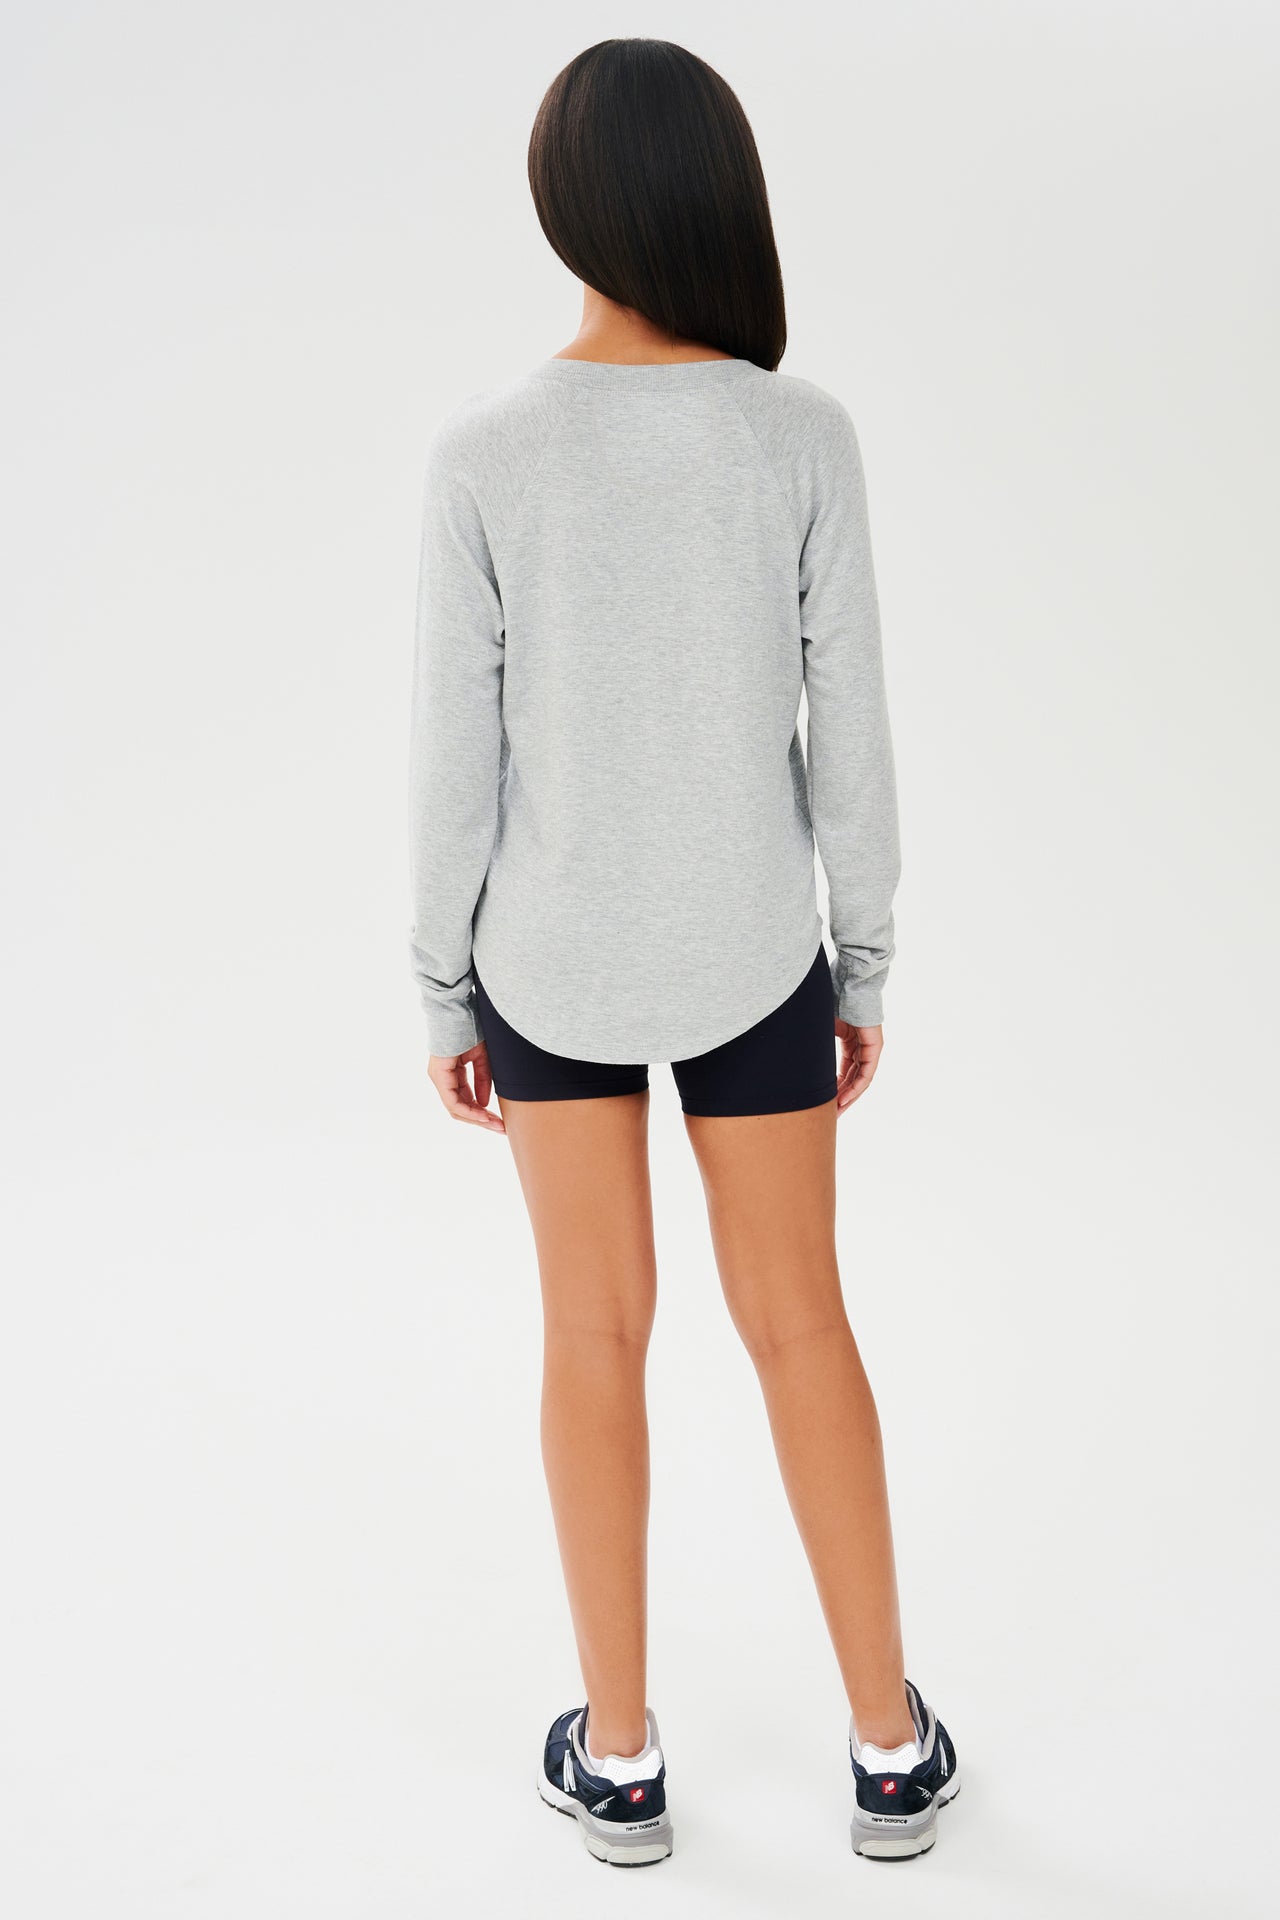 Full back side shot of woman with dark straight hair, wearing grey sweatshirt with black shorts and dark blue shoes